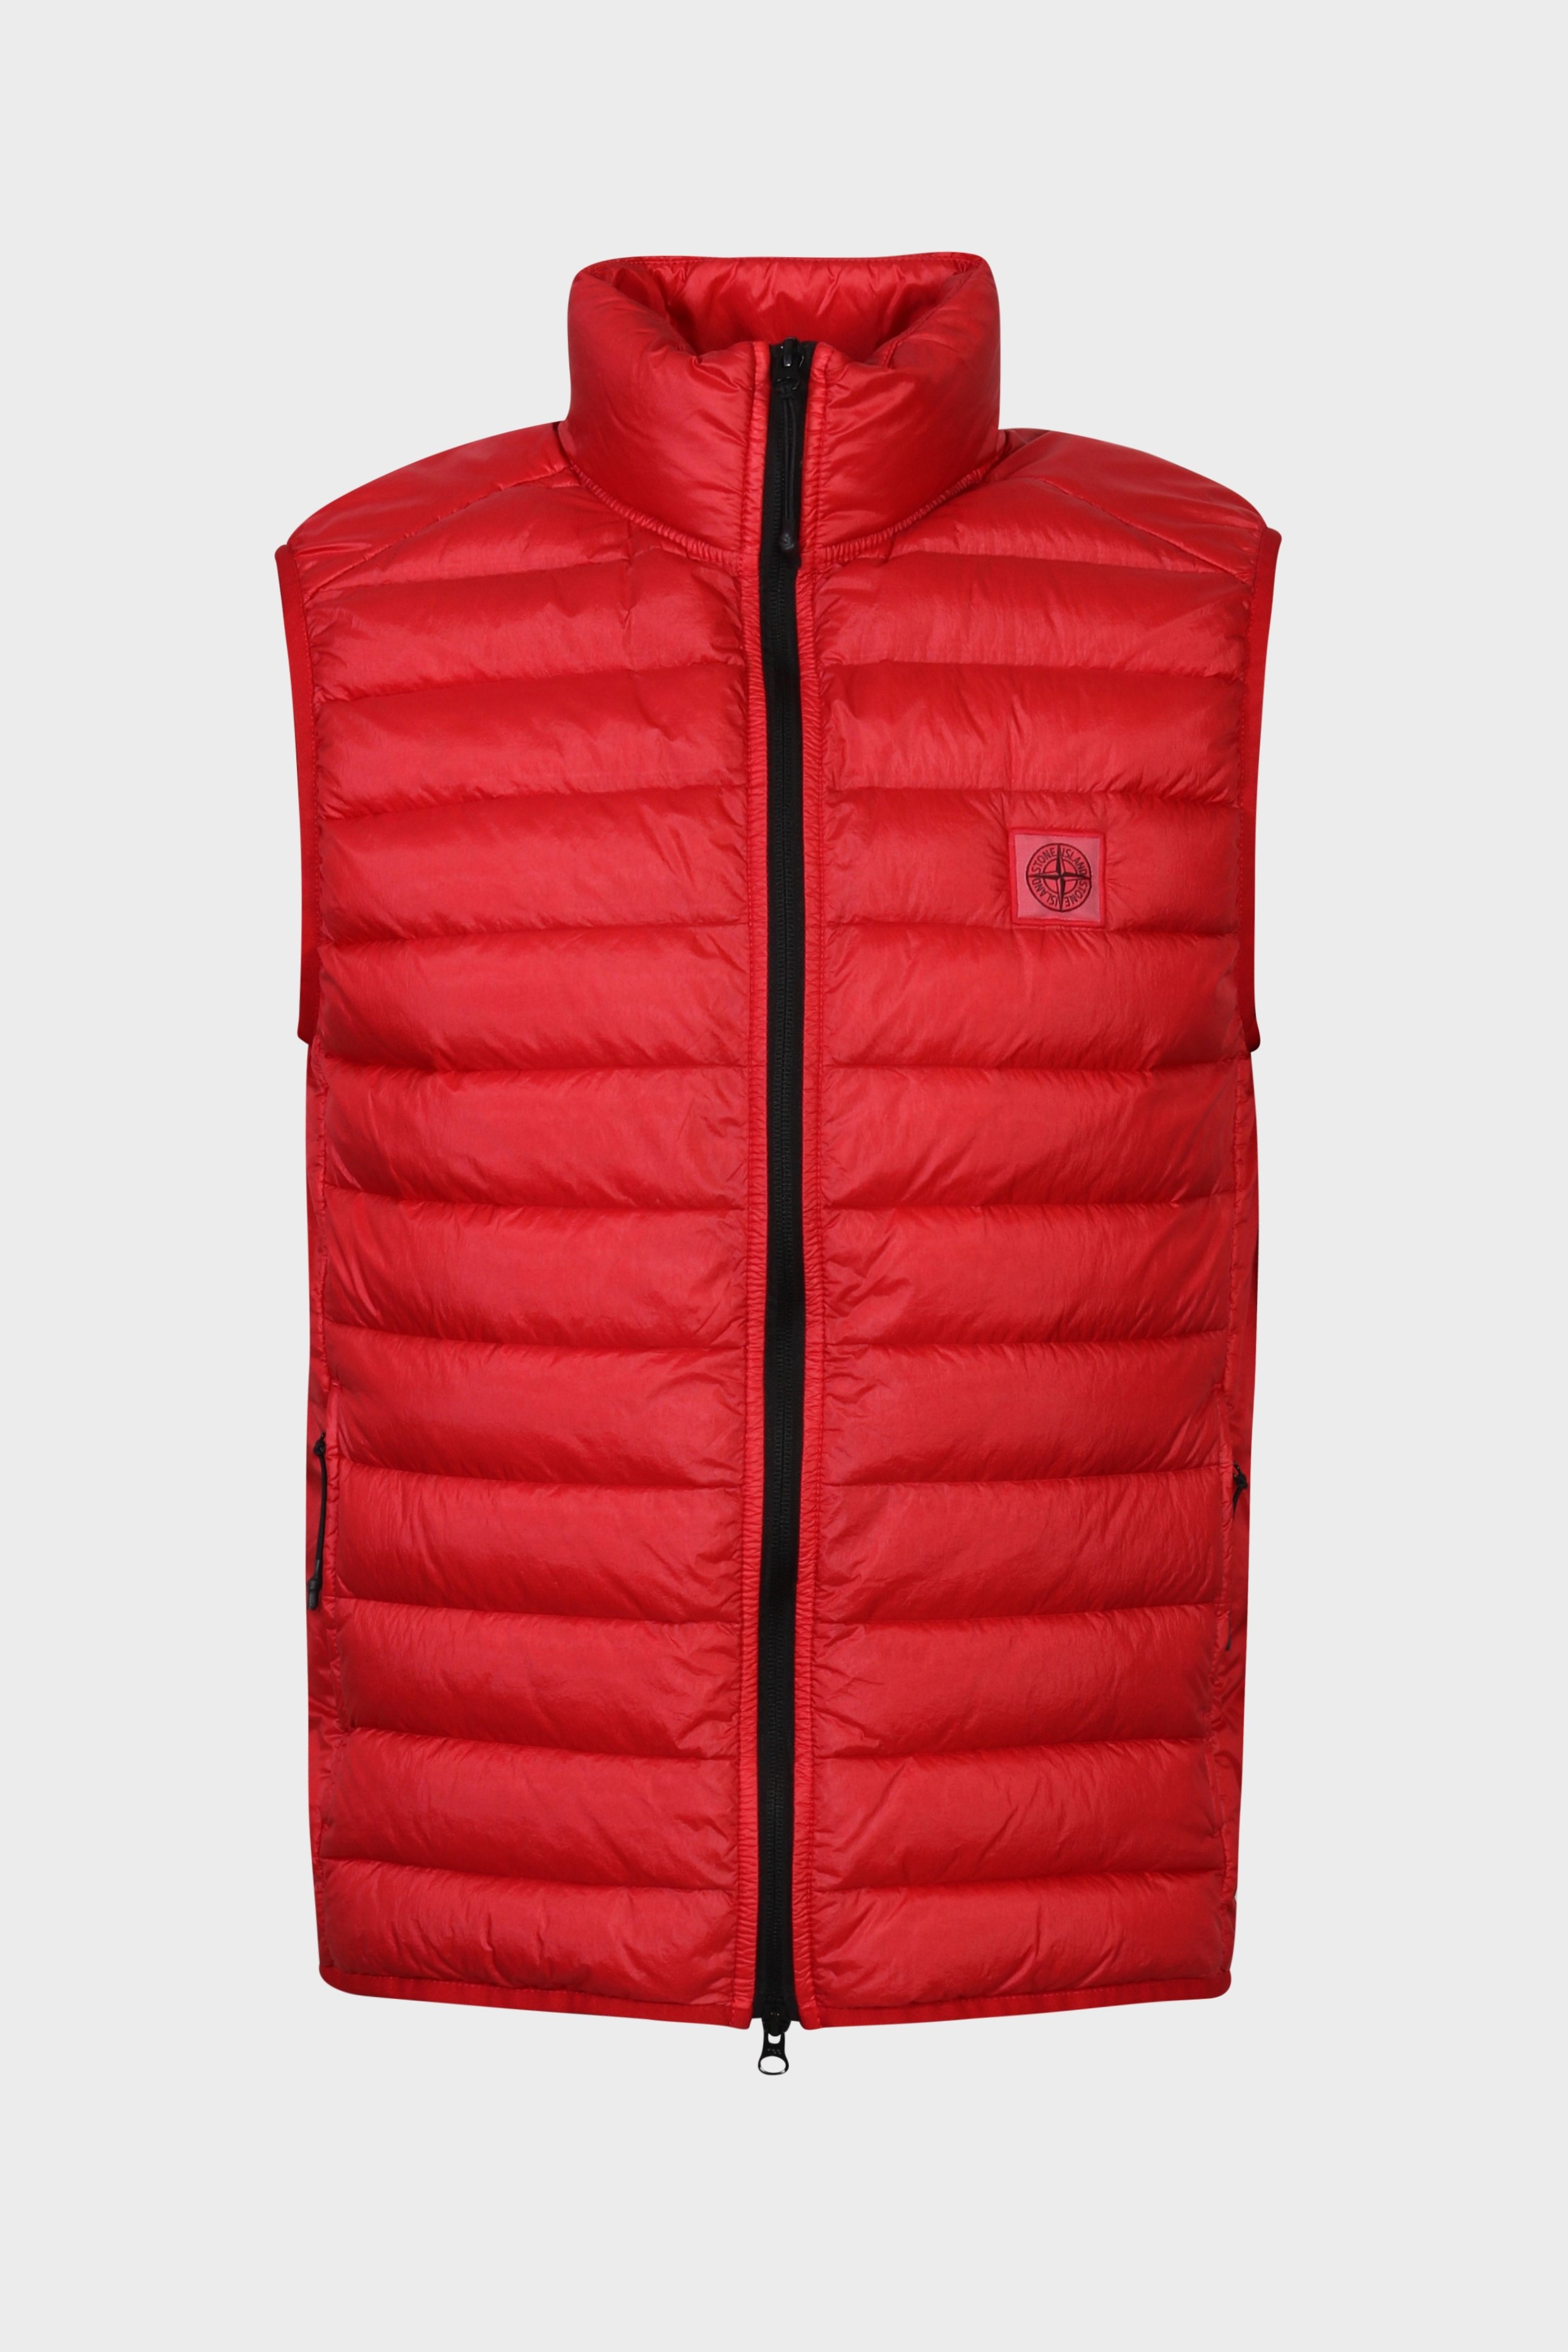 STONE ISLAND Down Vest in Red S